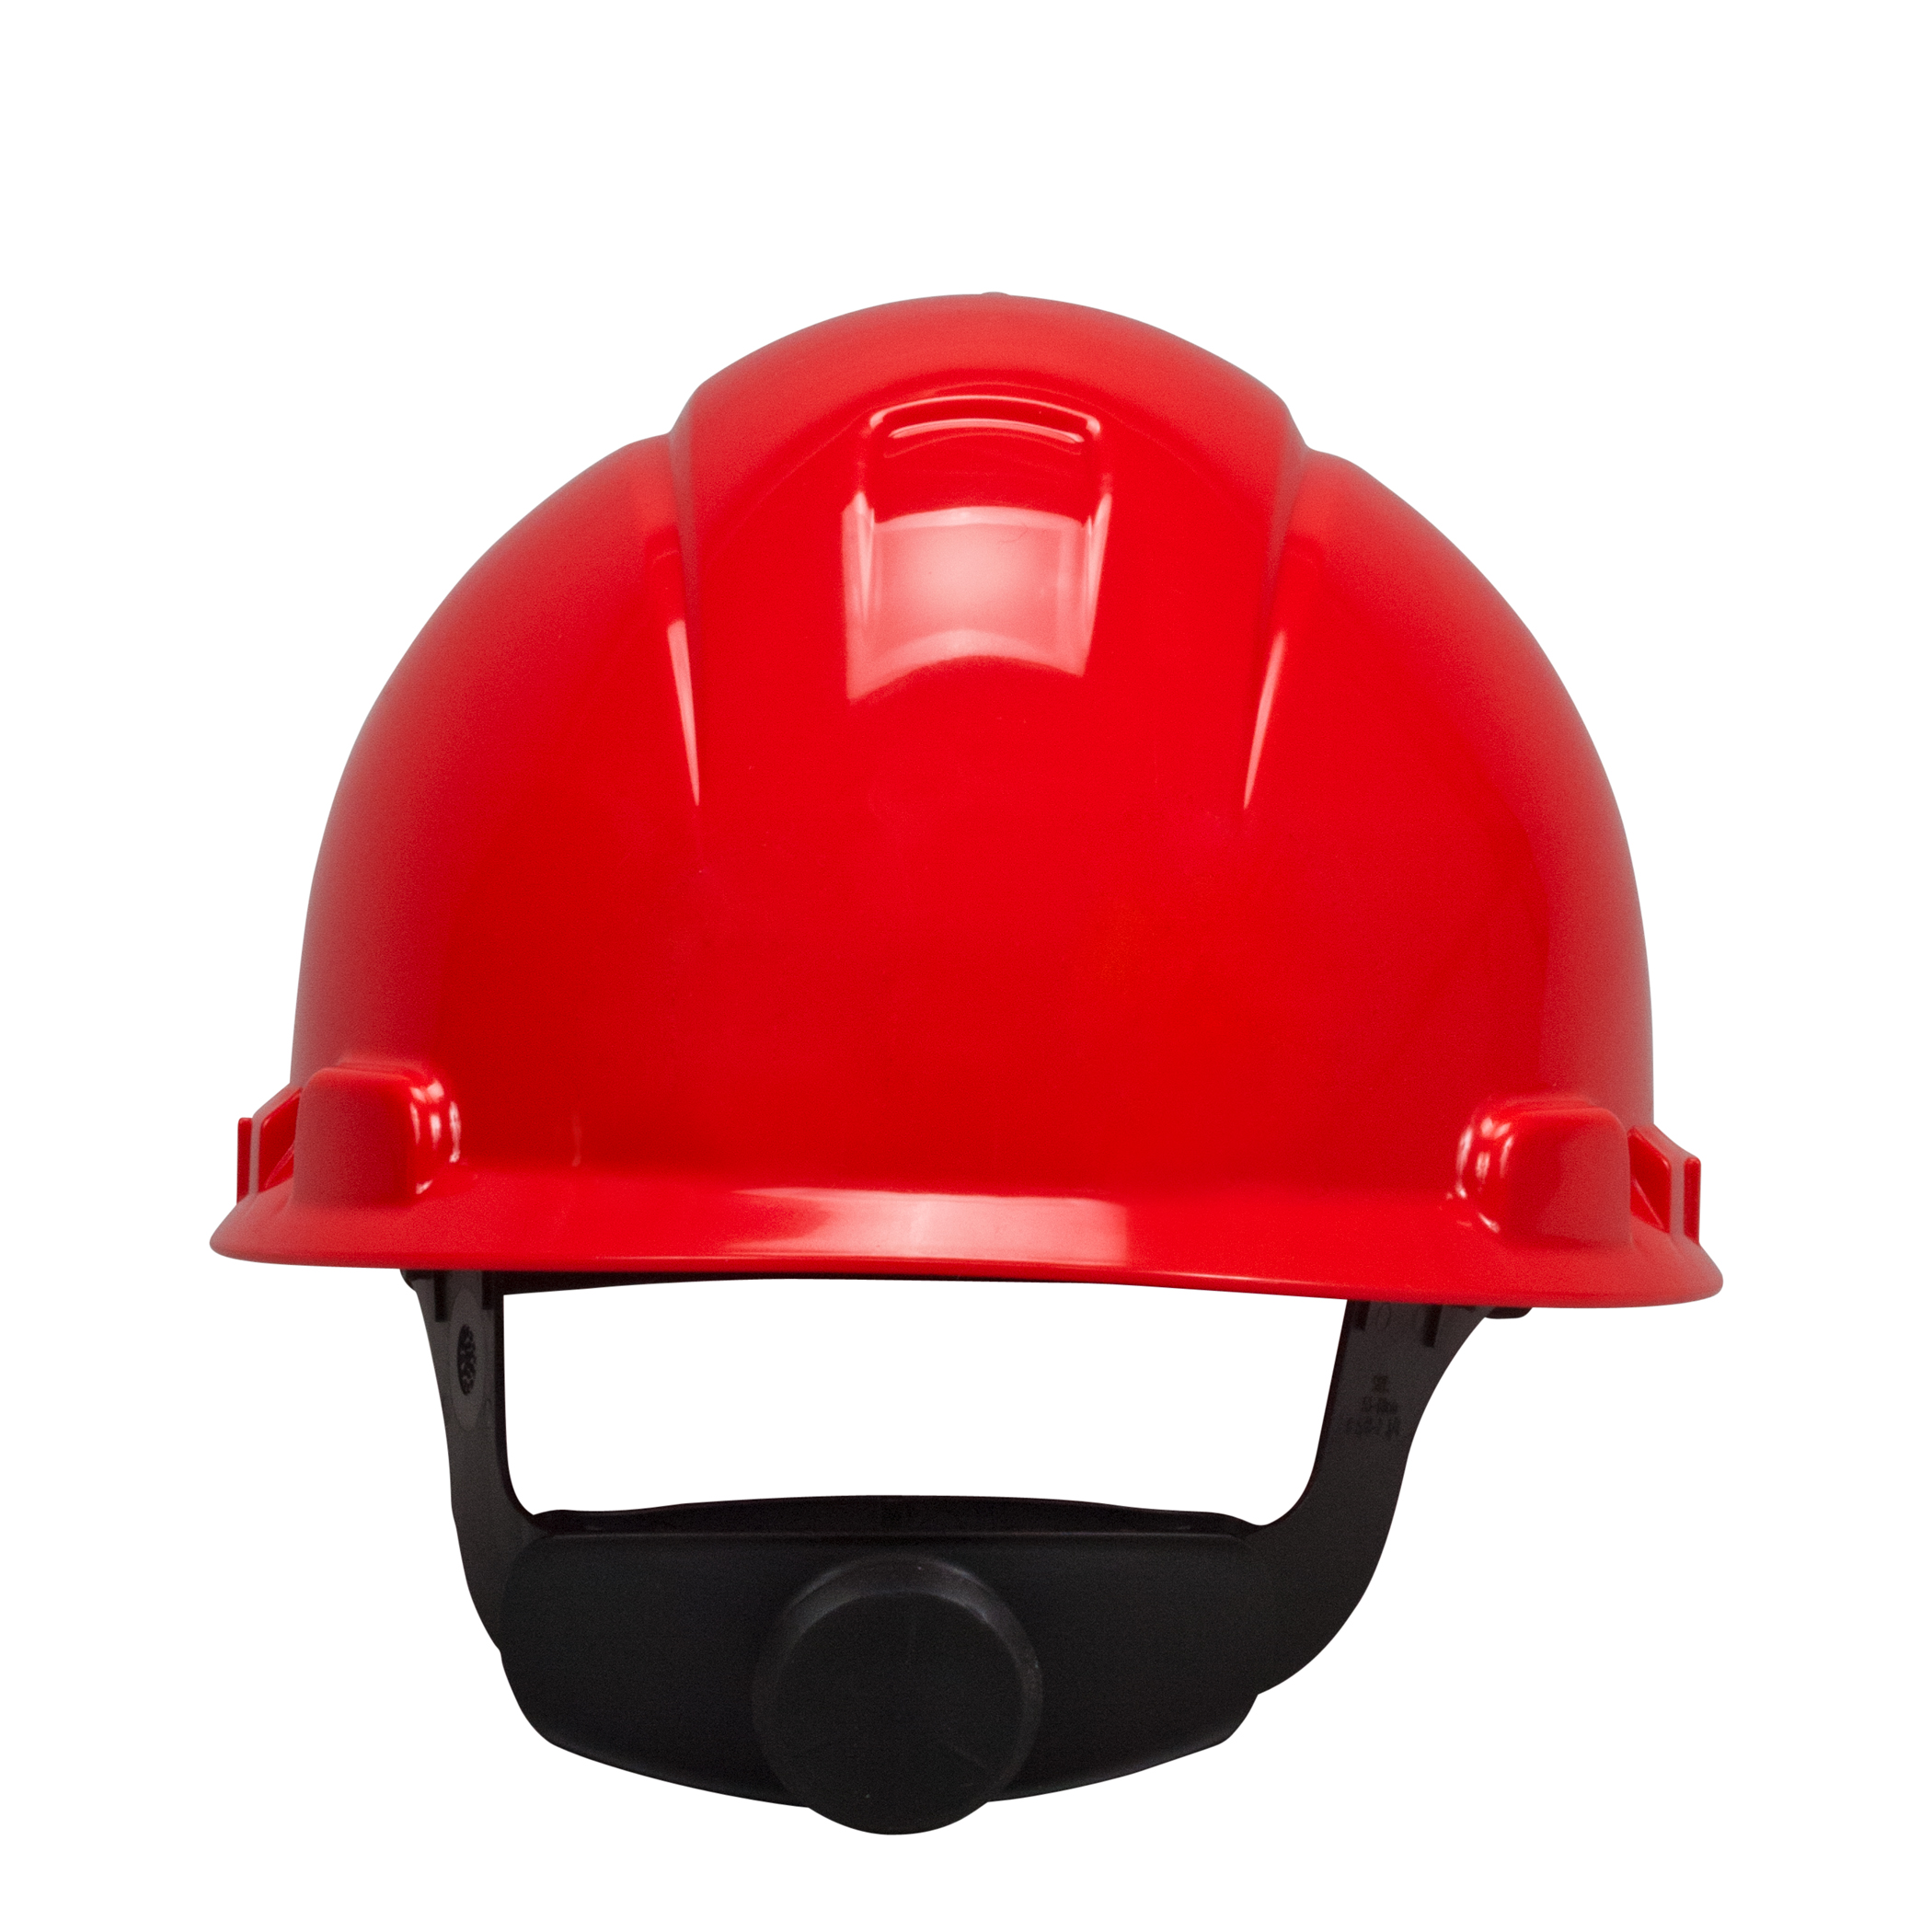 3M 700 Series 4-Point Ratchet Suspension Hard Hat from Columbia Safety